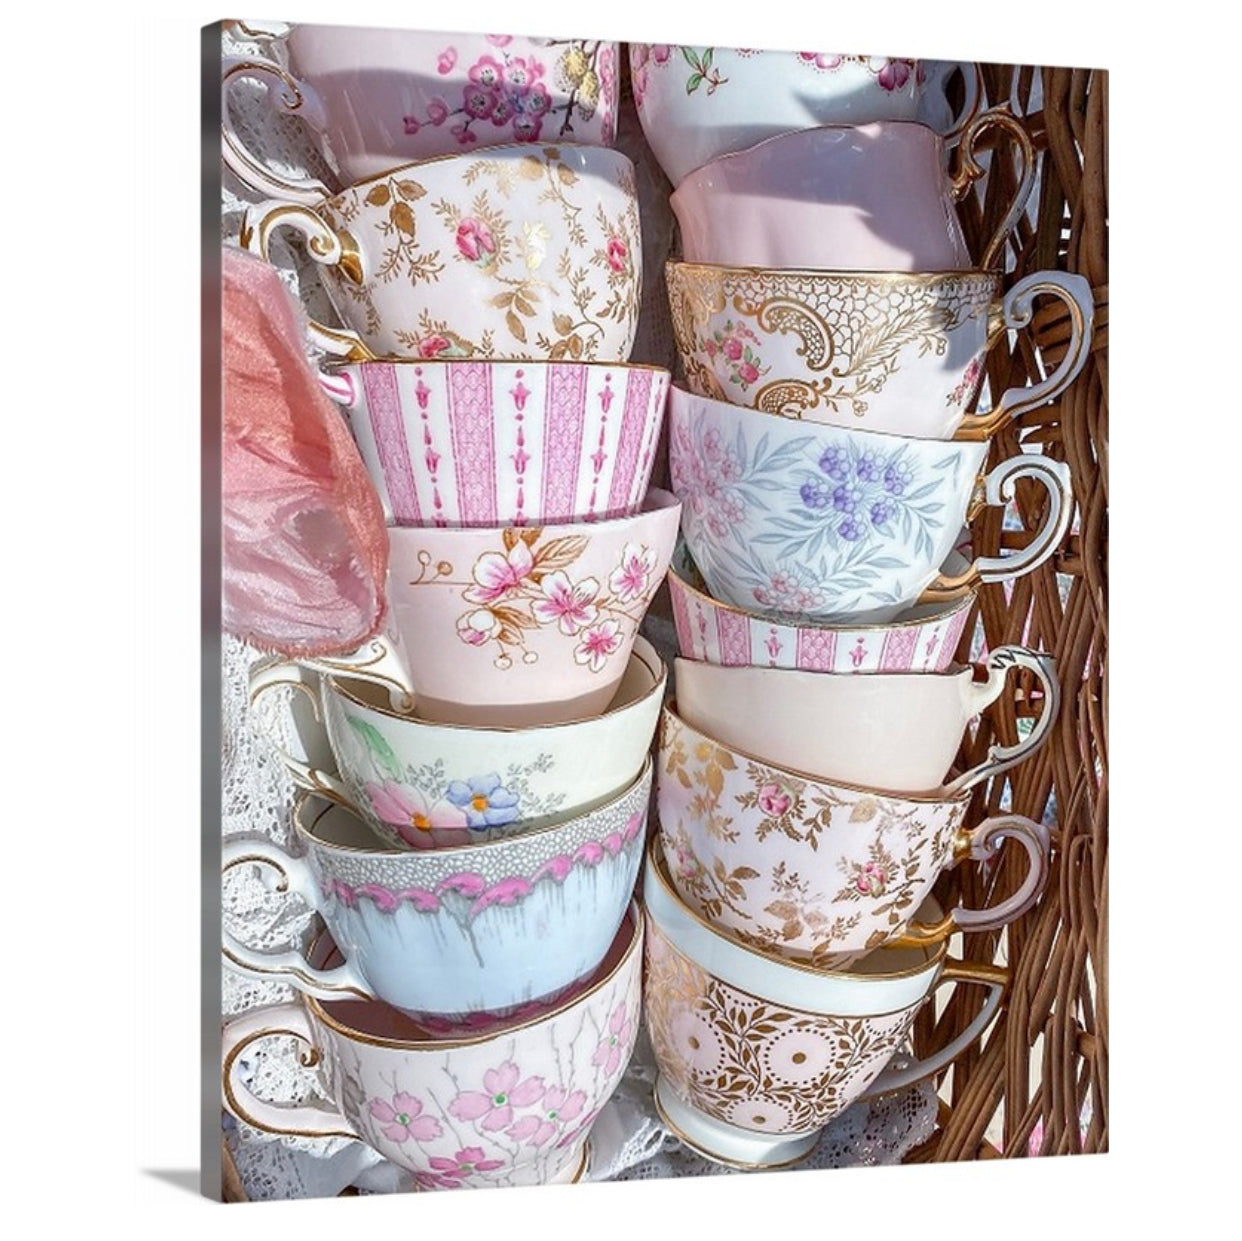 Teacups in A Basket Gallery Wrapped Canvas